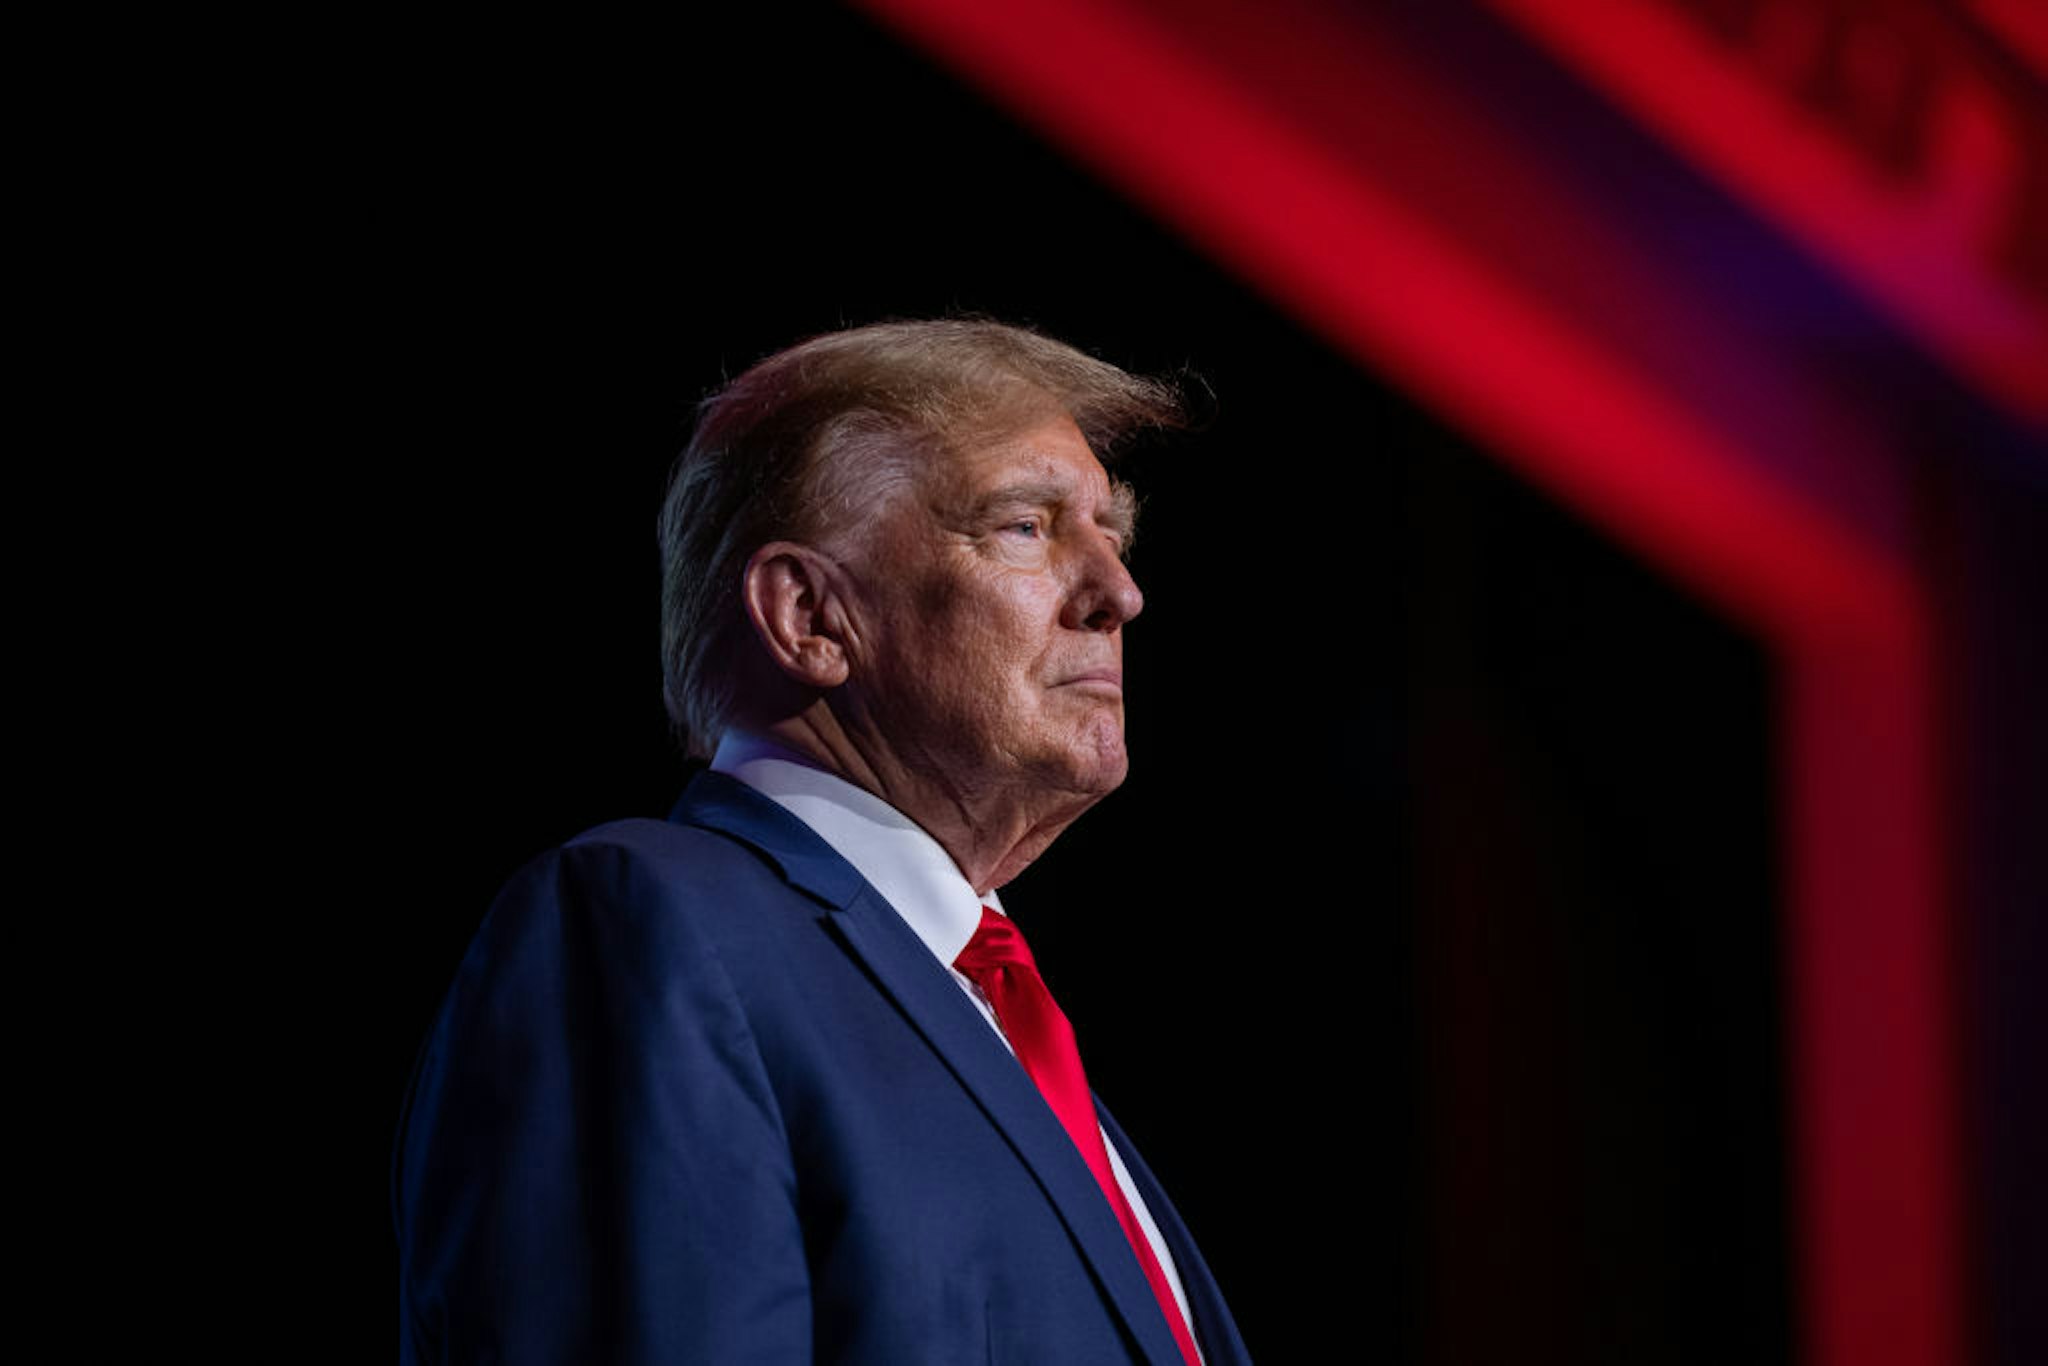 NASHVILLE, TENNESSEE - FEBRUARY 22: Republican presidential candidate, former U.S. President Donald Trump, stands on stage during the 2024 NRB International Christian Media Convention Presidential Forum at The Gaylord Opryland Resort and Convention Center on February 22, 2024 in Nashville, Tennessee. Trump's appearance comes shortly after judge Arthur Engoron, who is presiding over Trump's $355 million civil fraud case in New York, denied the former president's request to delay the judgment for a month.